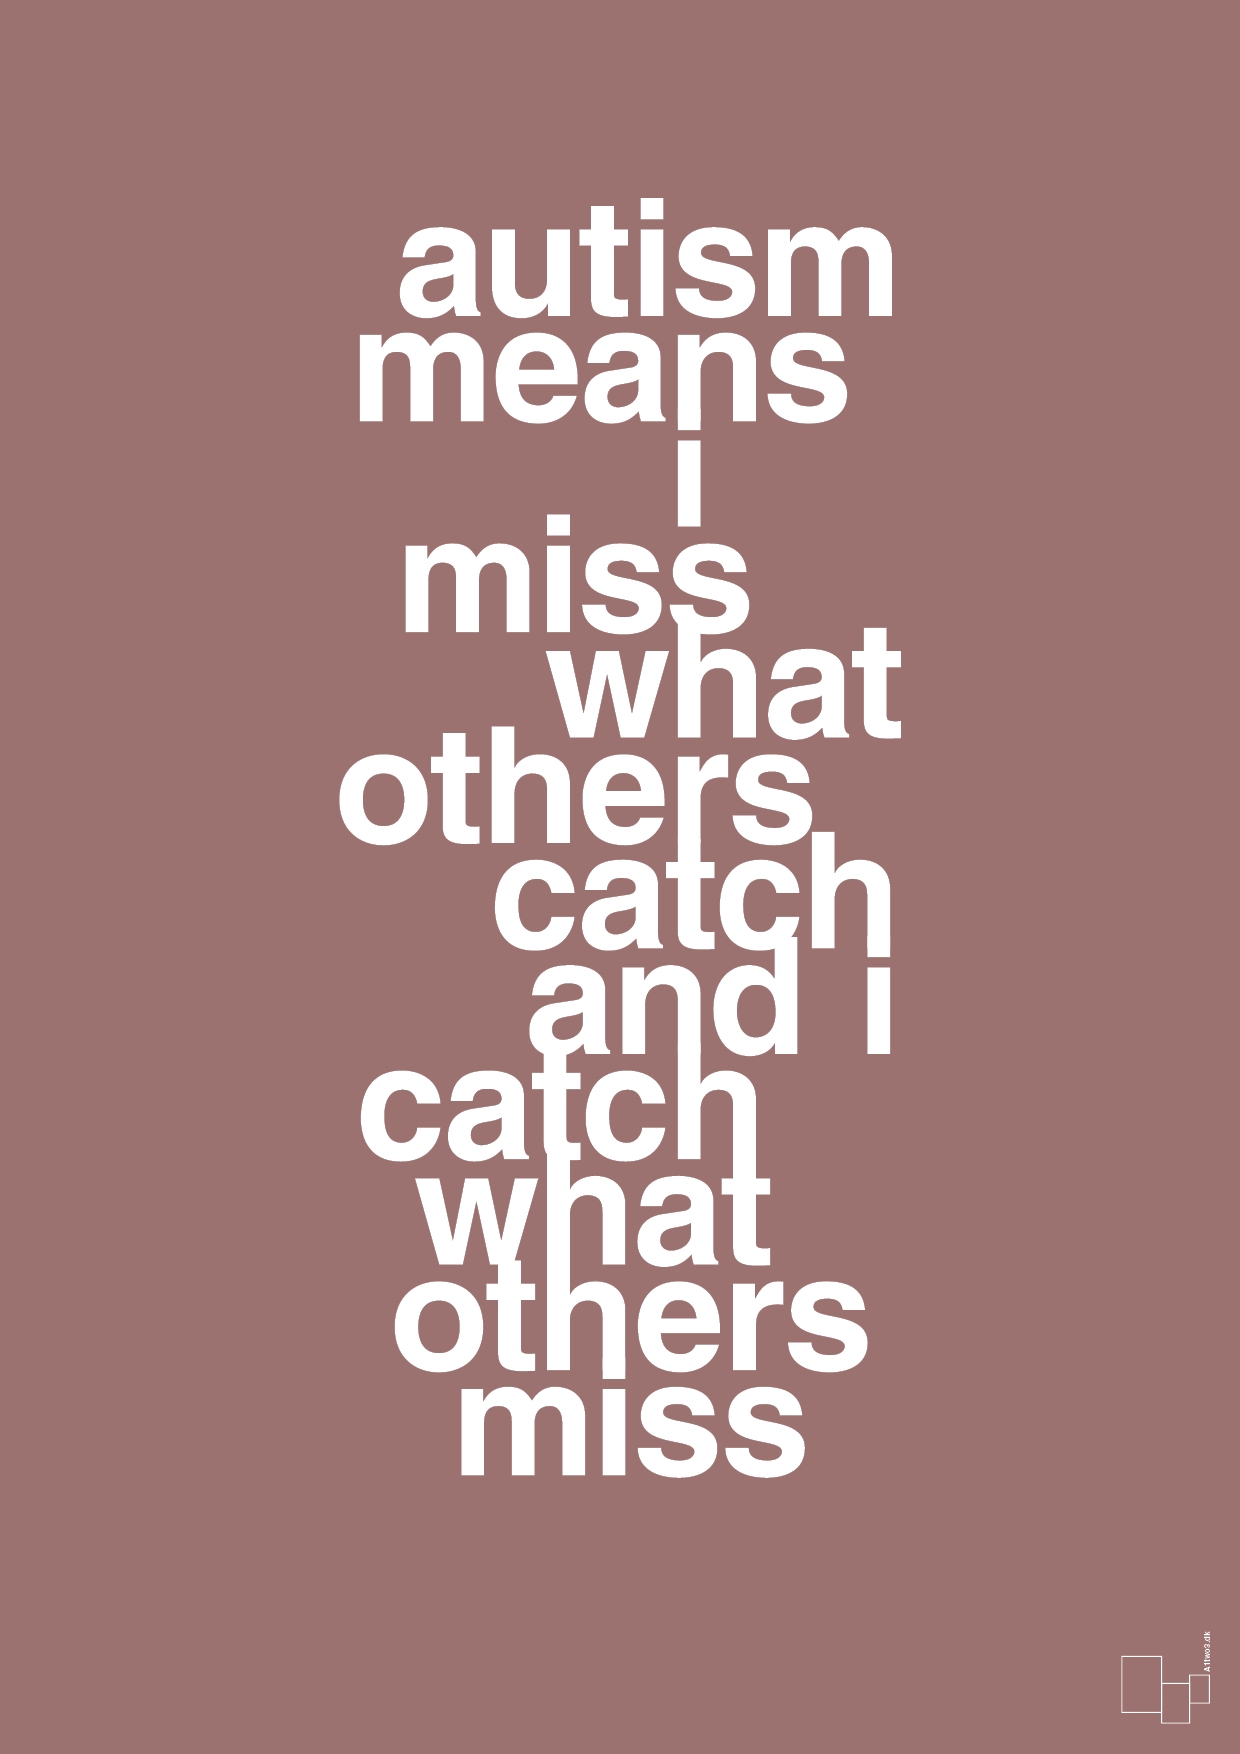 autism means i miss what others catch and i catch what others miss - Plakat med Samfund i Plum